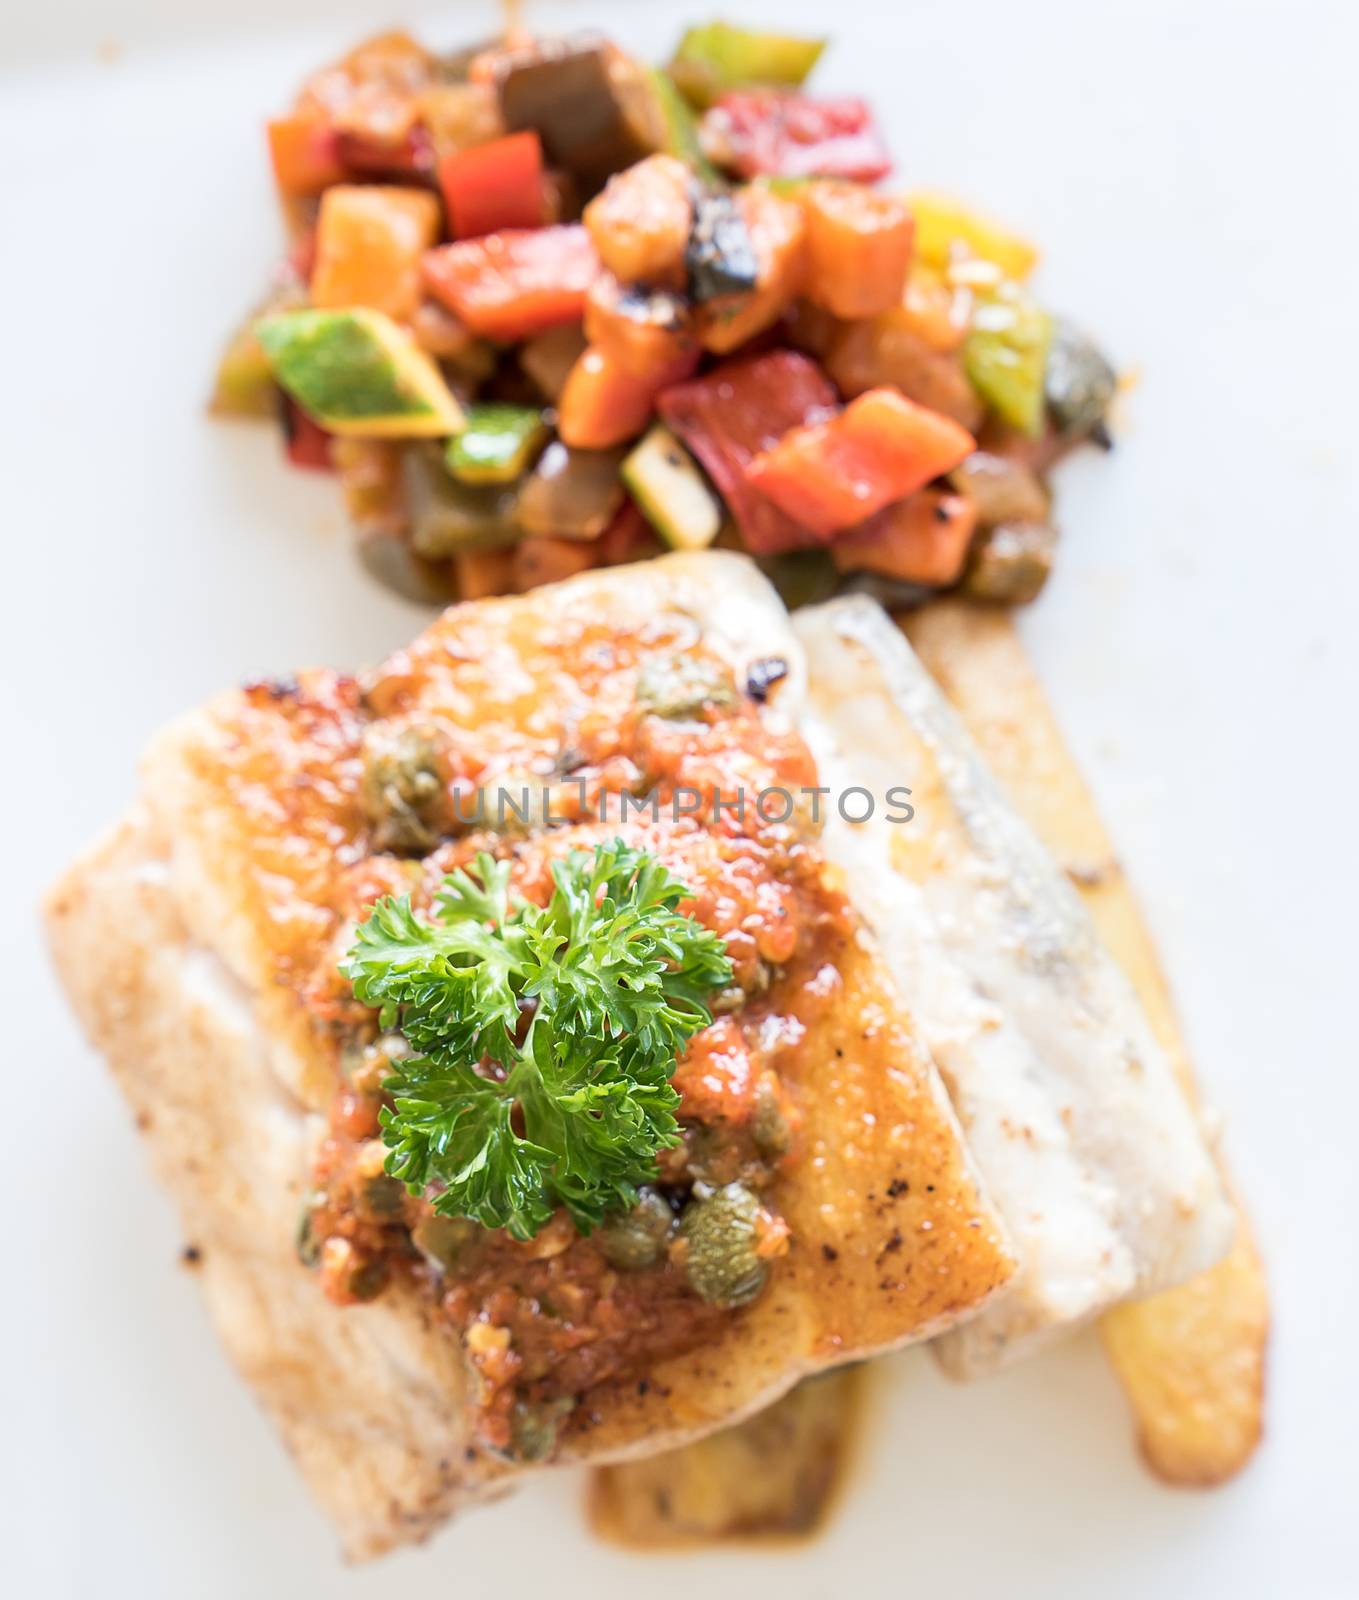 Grilled seabass fish with grilled vegetable on fries